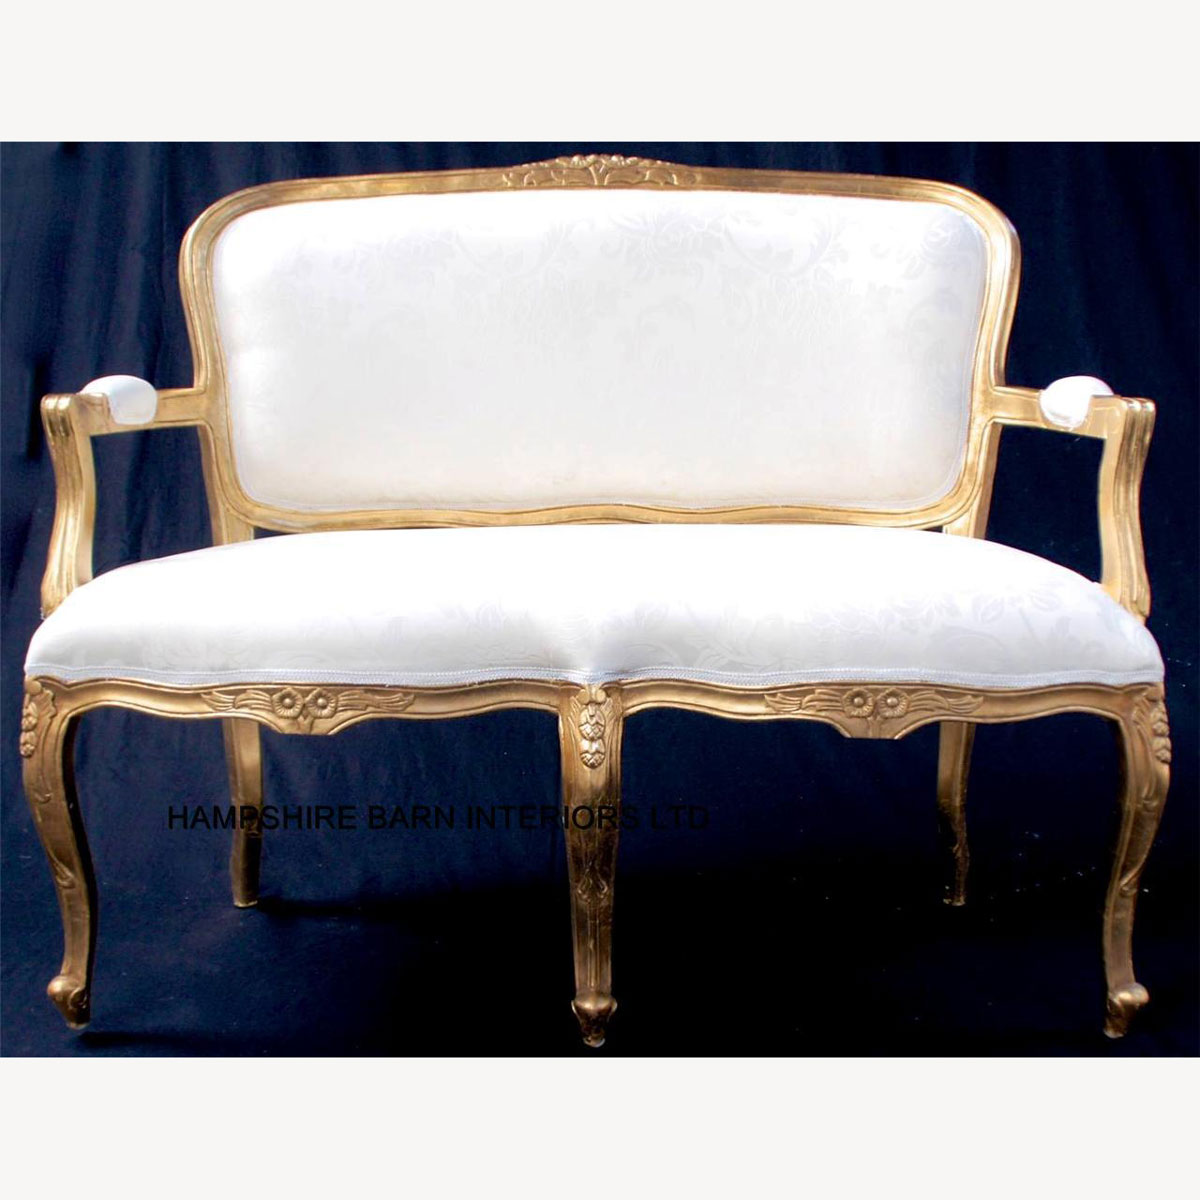 Josephine French Style Small Sofa Double Ended Chaise In Gold And Ivory Cream Damask 1 - Hampshire Barn Interiors - Josephine French Style Small Sofa / Double Ended Chaise In Gold And Ivory Cream Damask -